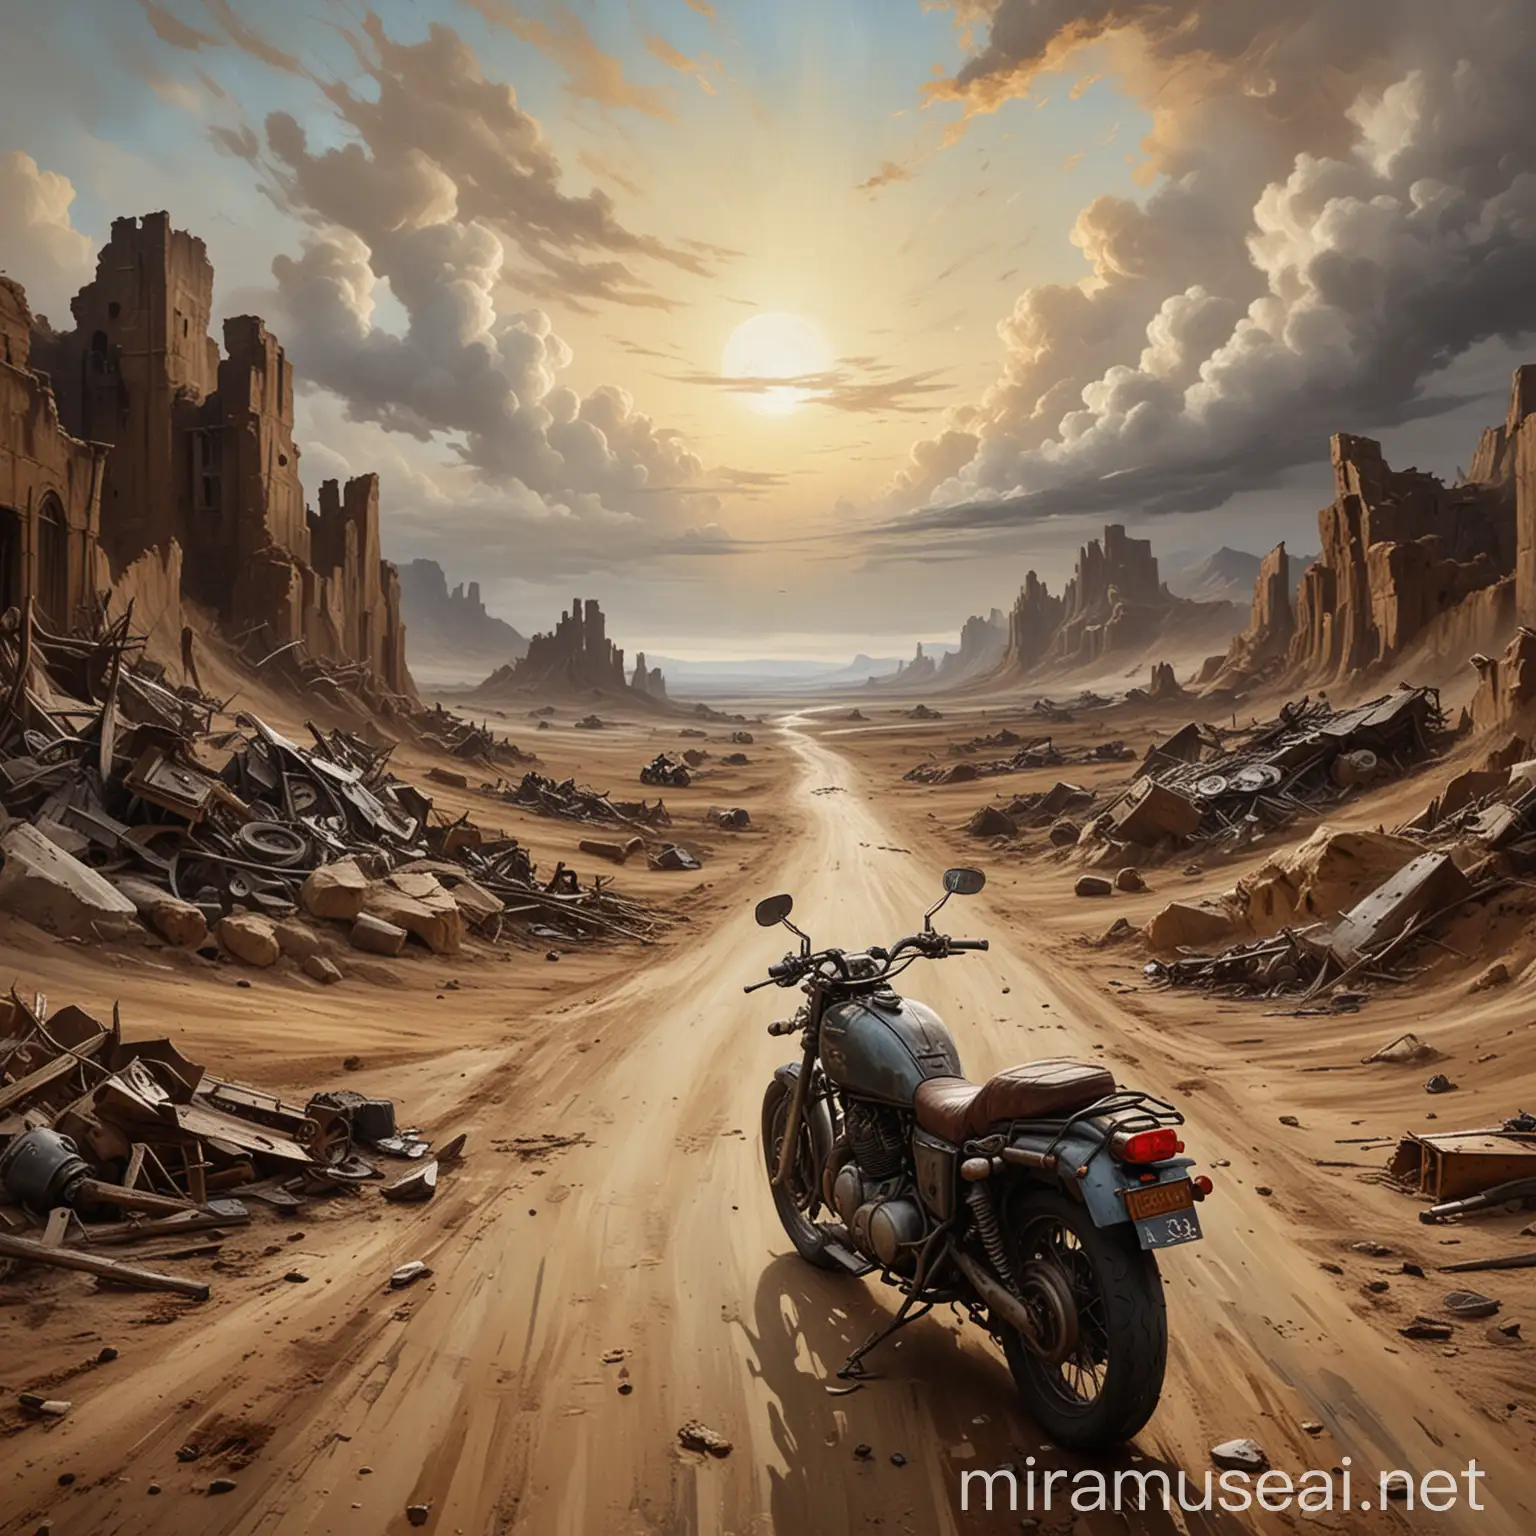 Motorcycle Apocalypse Landscape in Renaissance Oil Painting Style